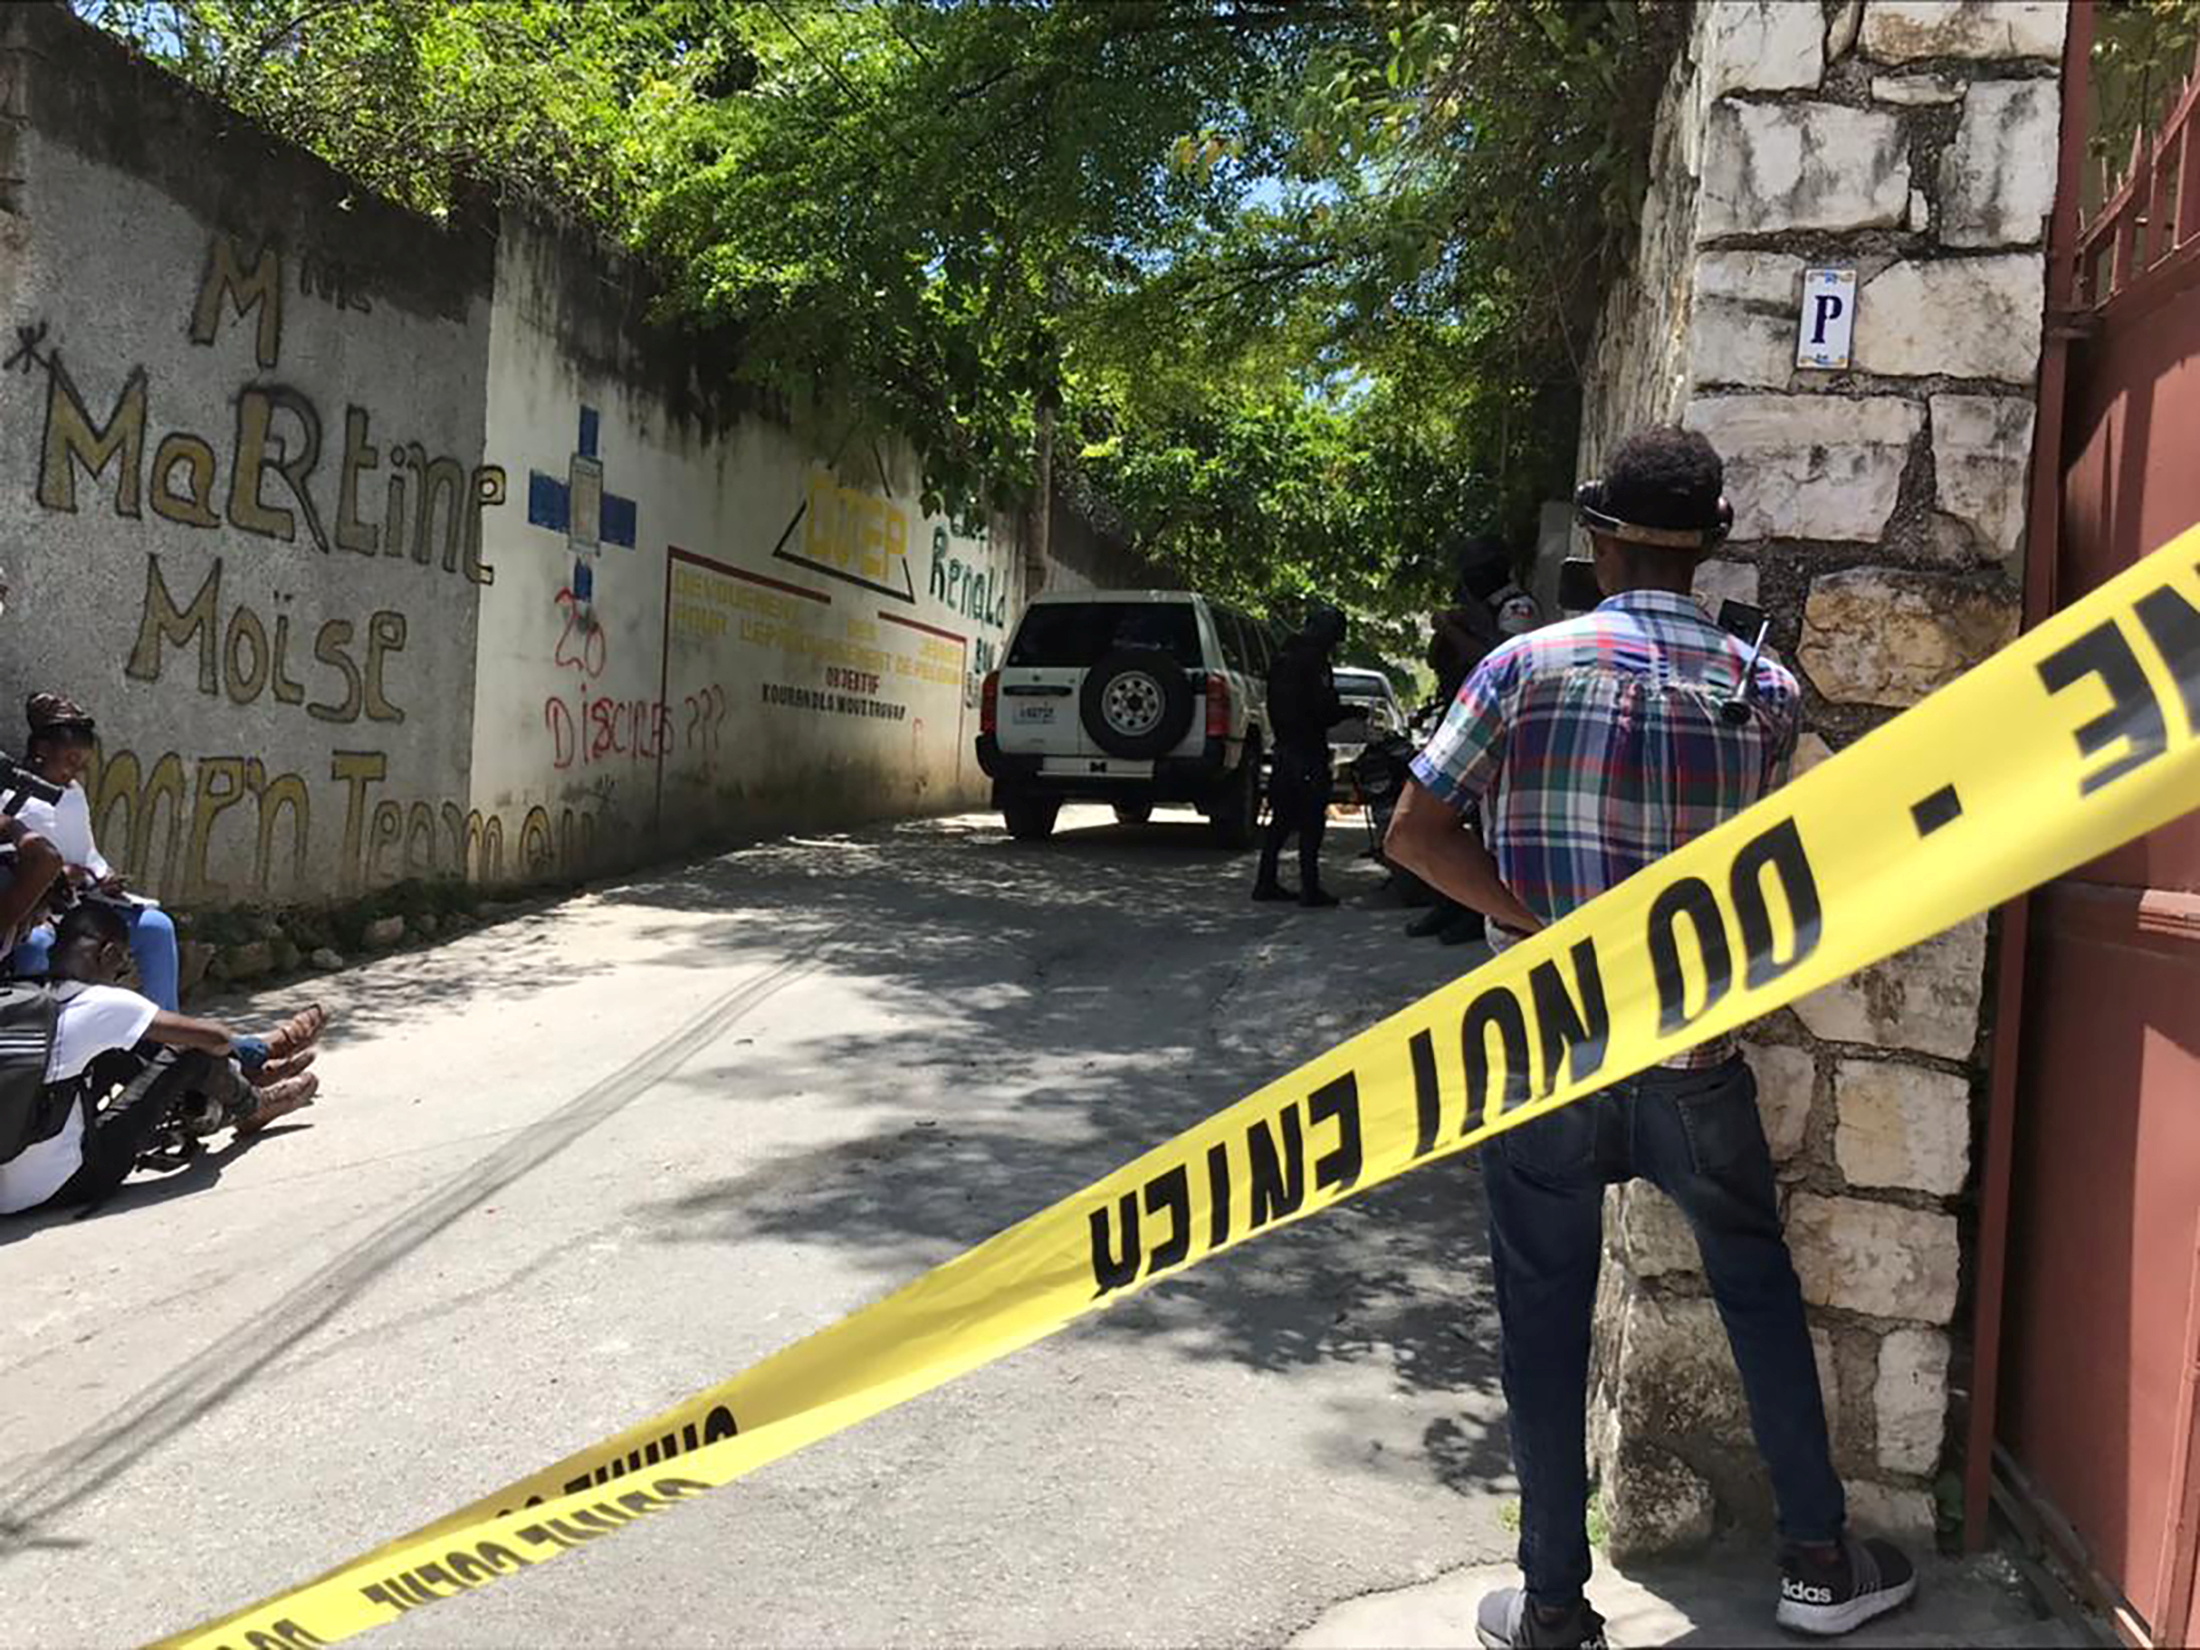 Journalists stand next to a yellow police cordon near the residence of Haiti's President Jovenel Moise after he was shot dead by unidentified attackers, in Port-au-Prince